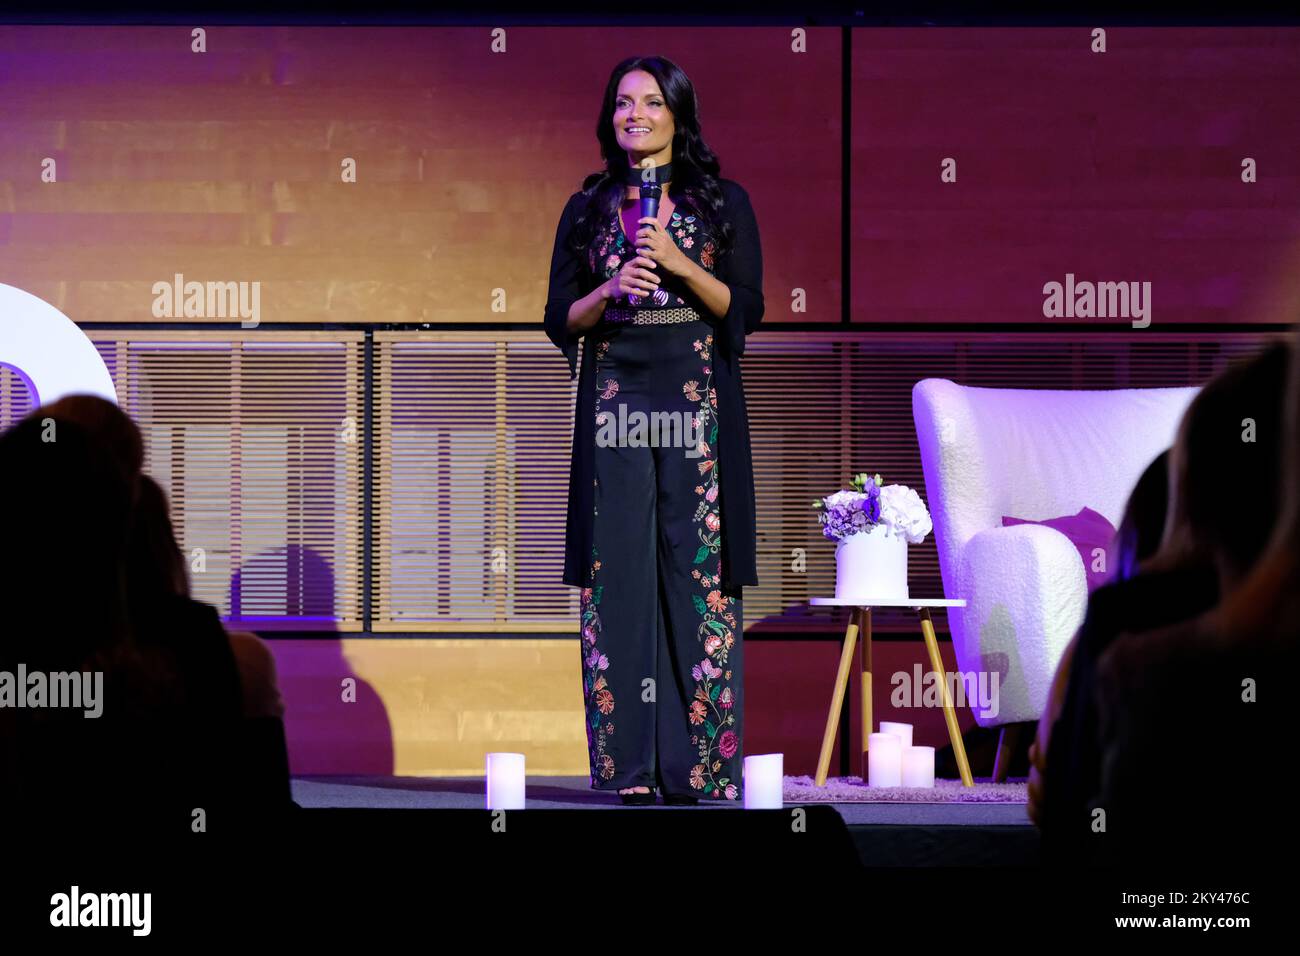 The world's leading parenting expert, clinical psychologist and New York Times bestselling author, Dr. Shefali Tsabary, gave a lecture on the concept of conscious parenting held at the Mozaik Event Center in Zagreb, Croatia on September 21, 2022. Photo: Slaven Branislav Babic/PIXSELL Stock Photo